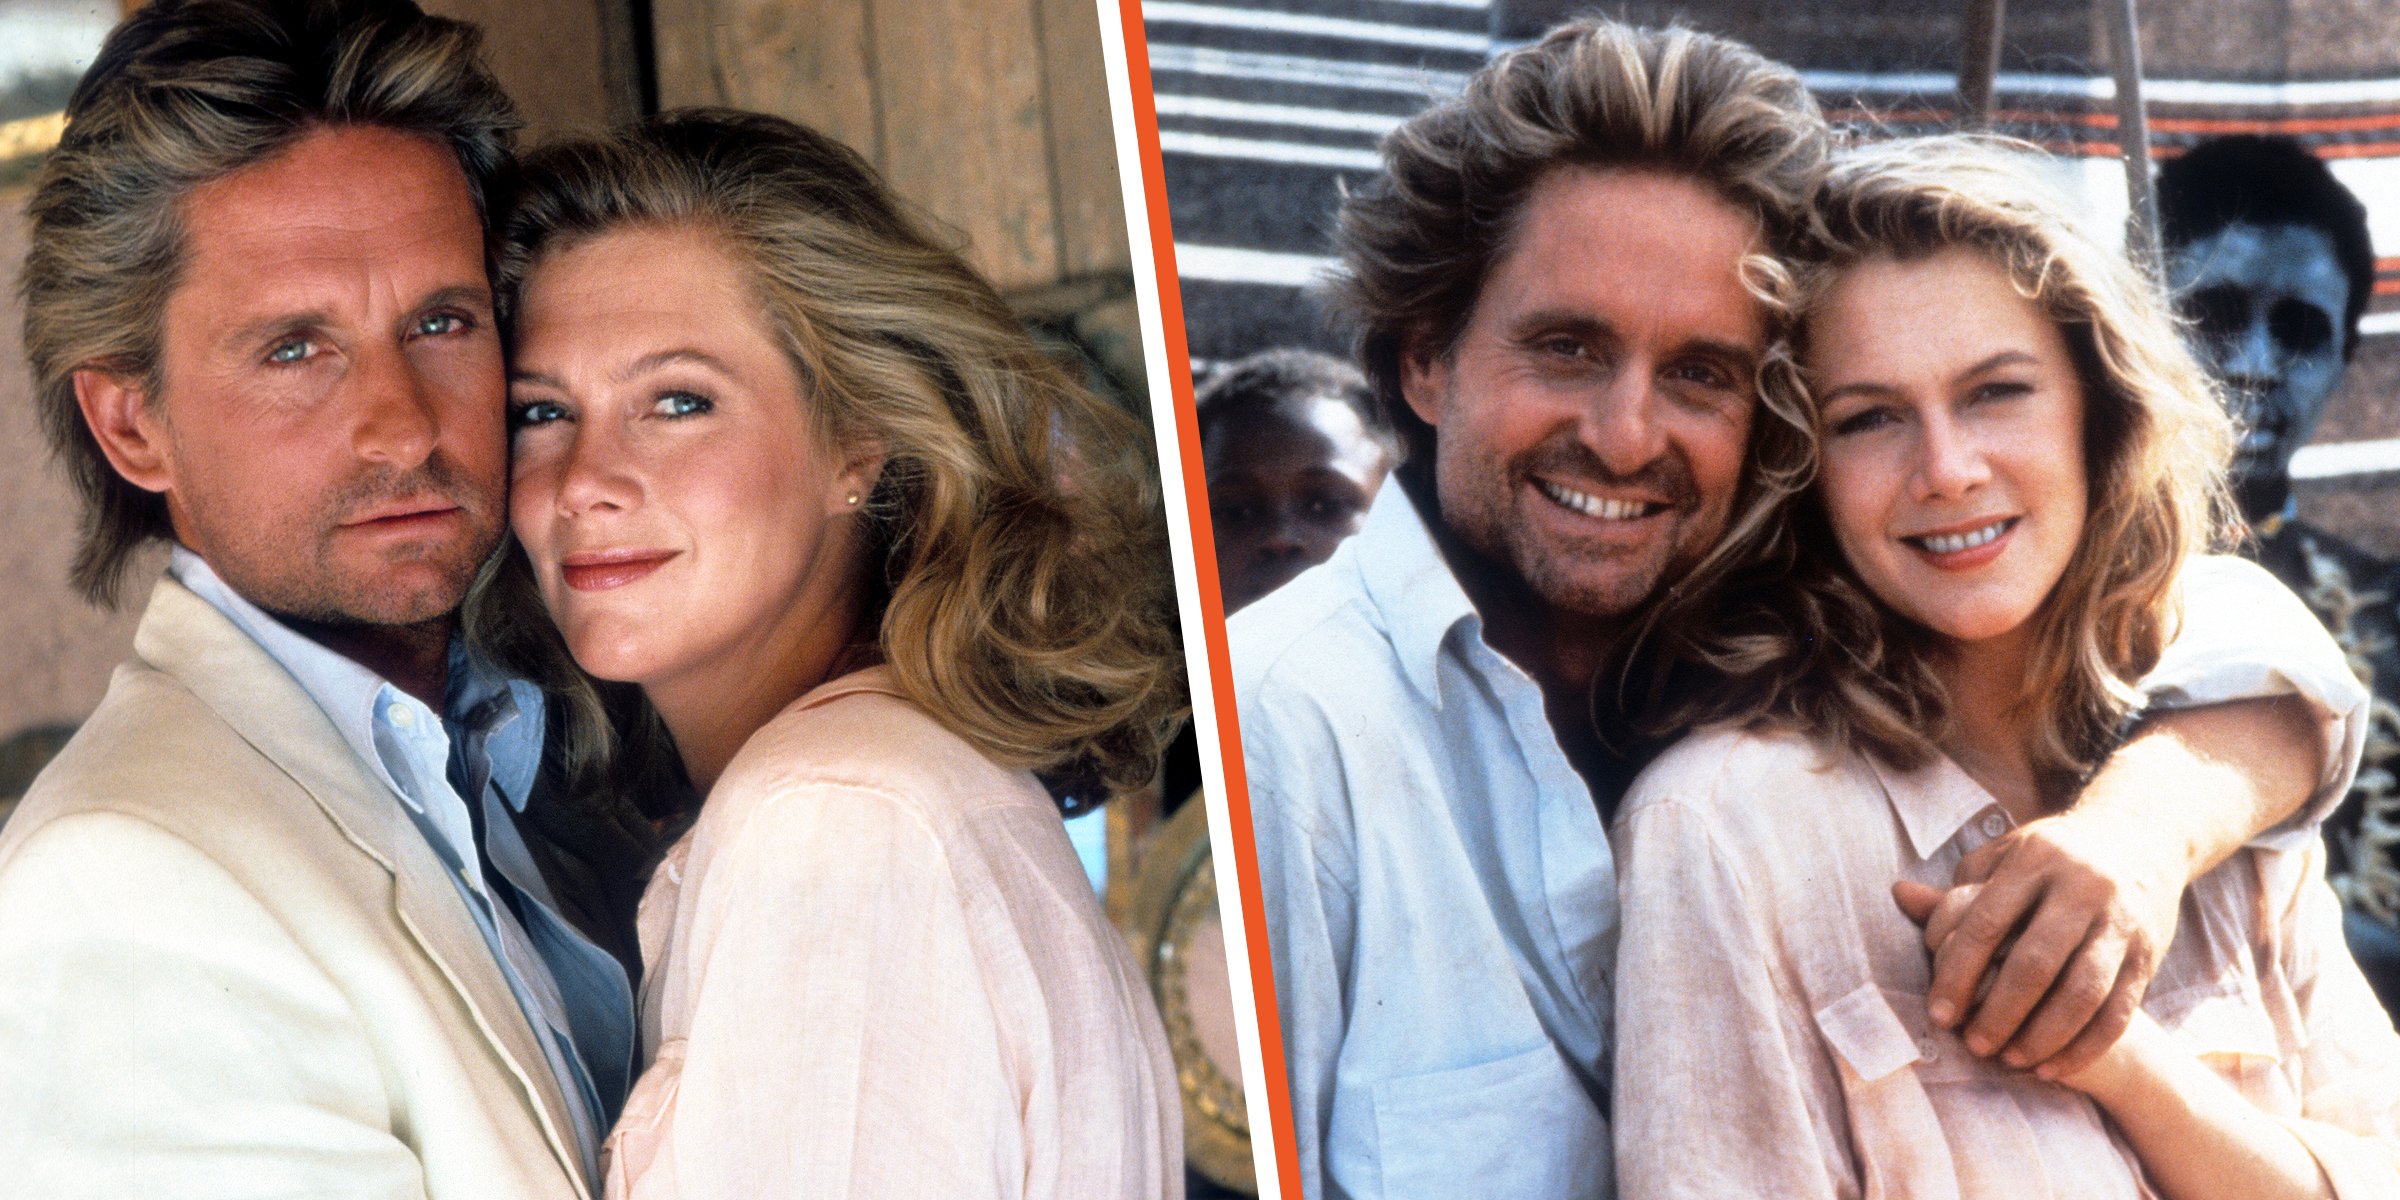 Michael Douglas and Kathleen Turner | Source: Getty Images